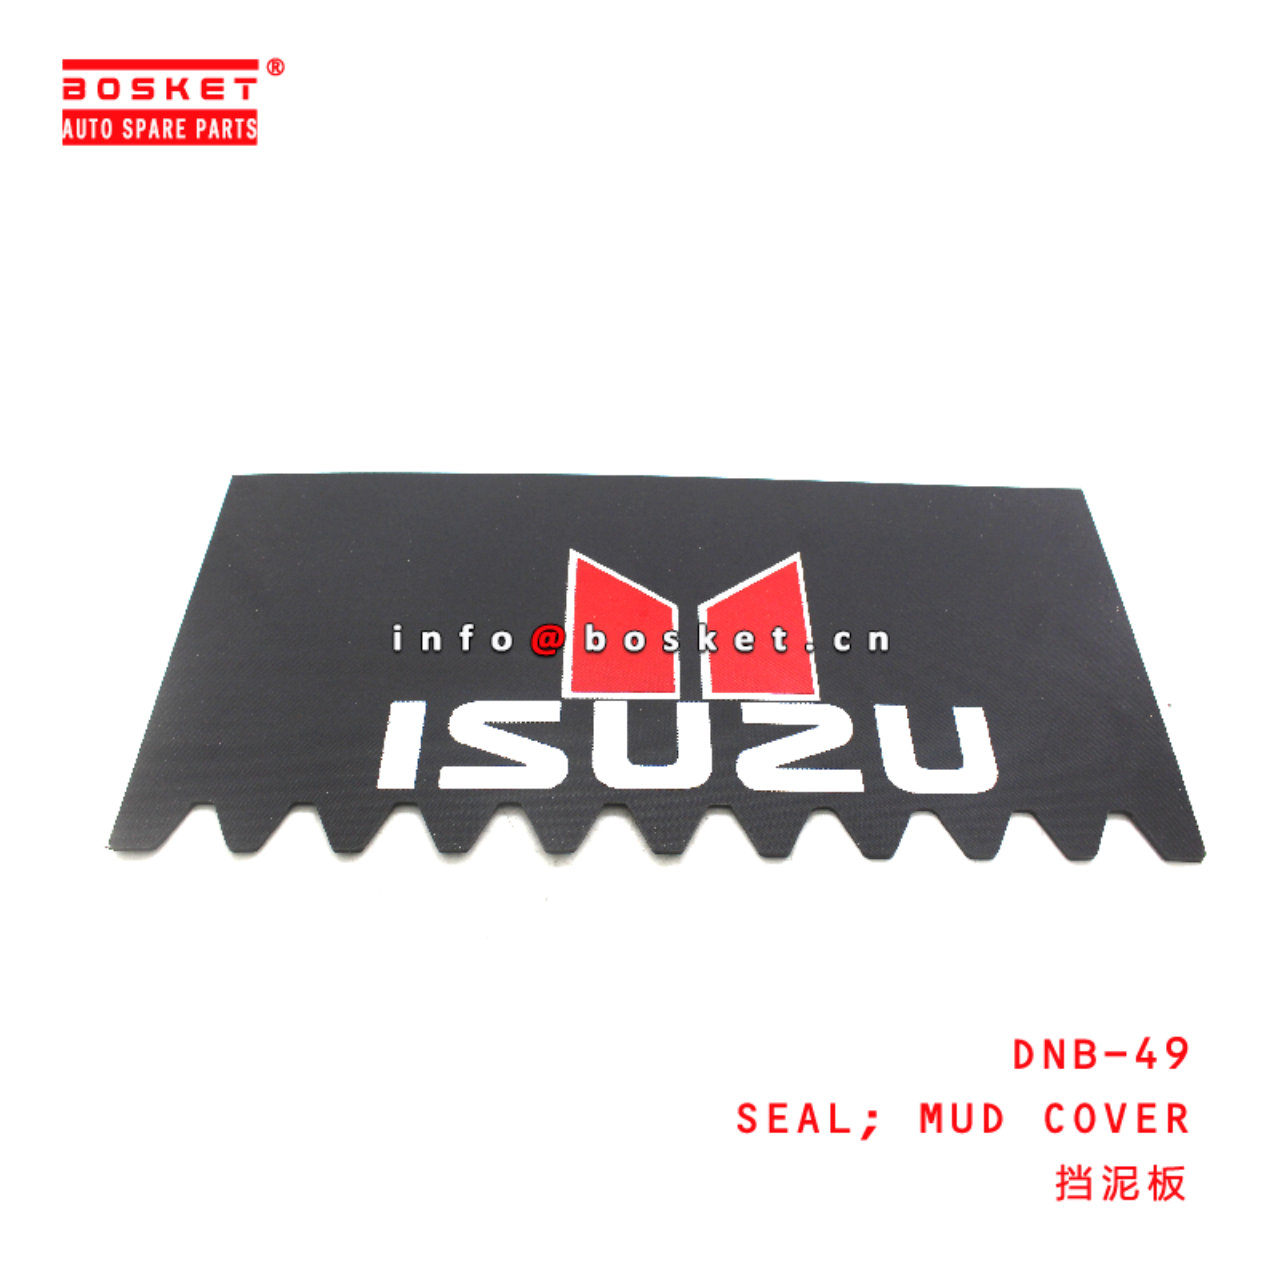 DNB-49 Mud Cover Seal suitable for ISUZU   DNB